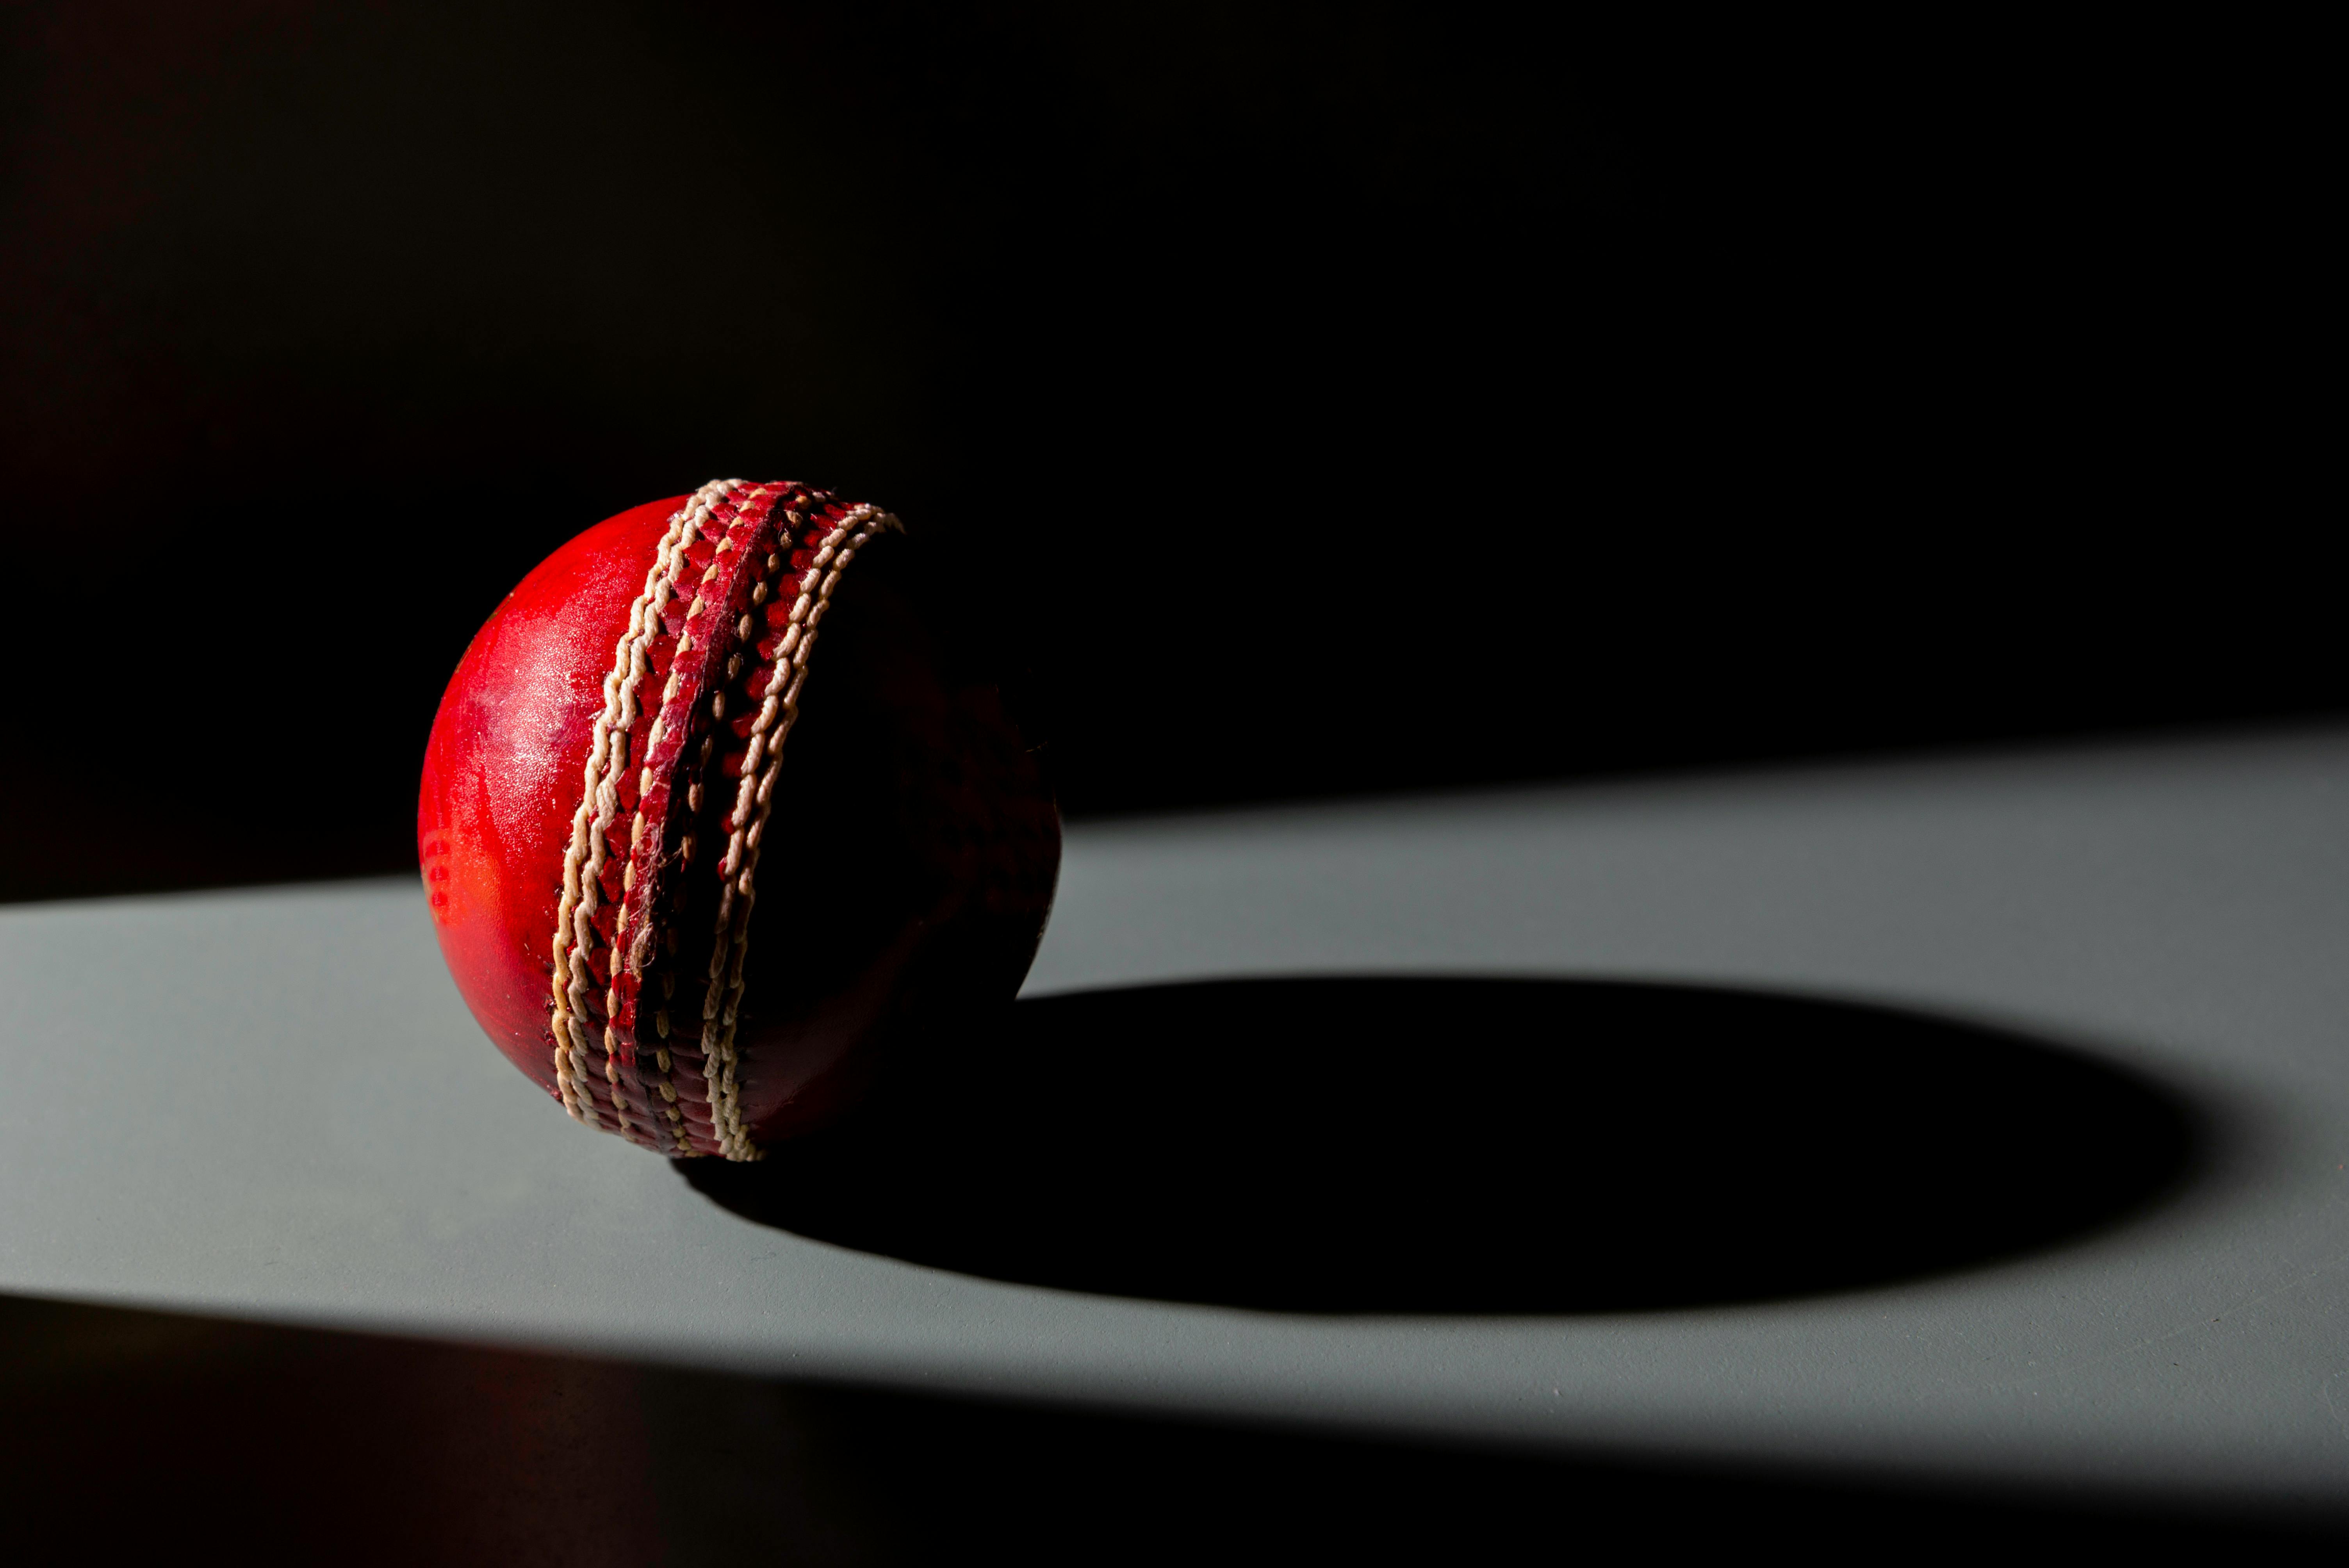 Cricket Wallpapers APK for Android Download